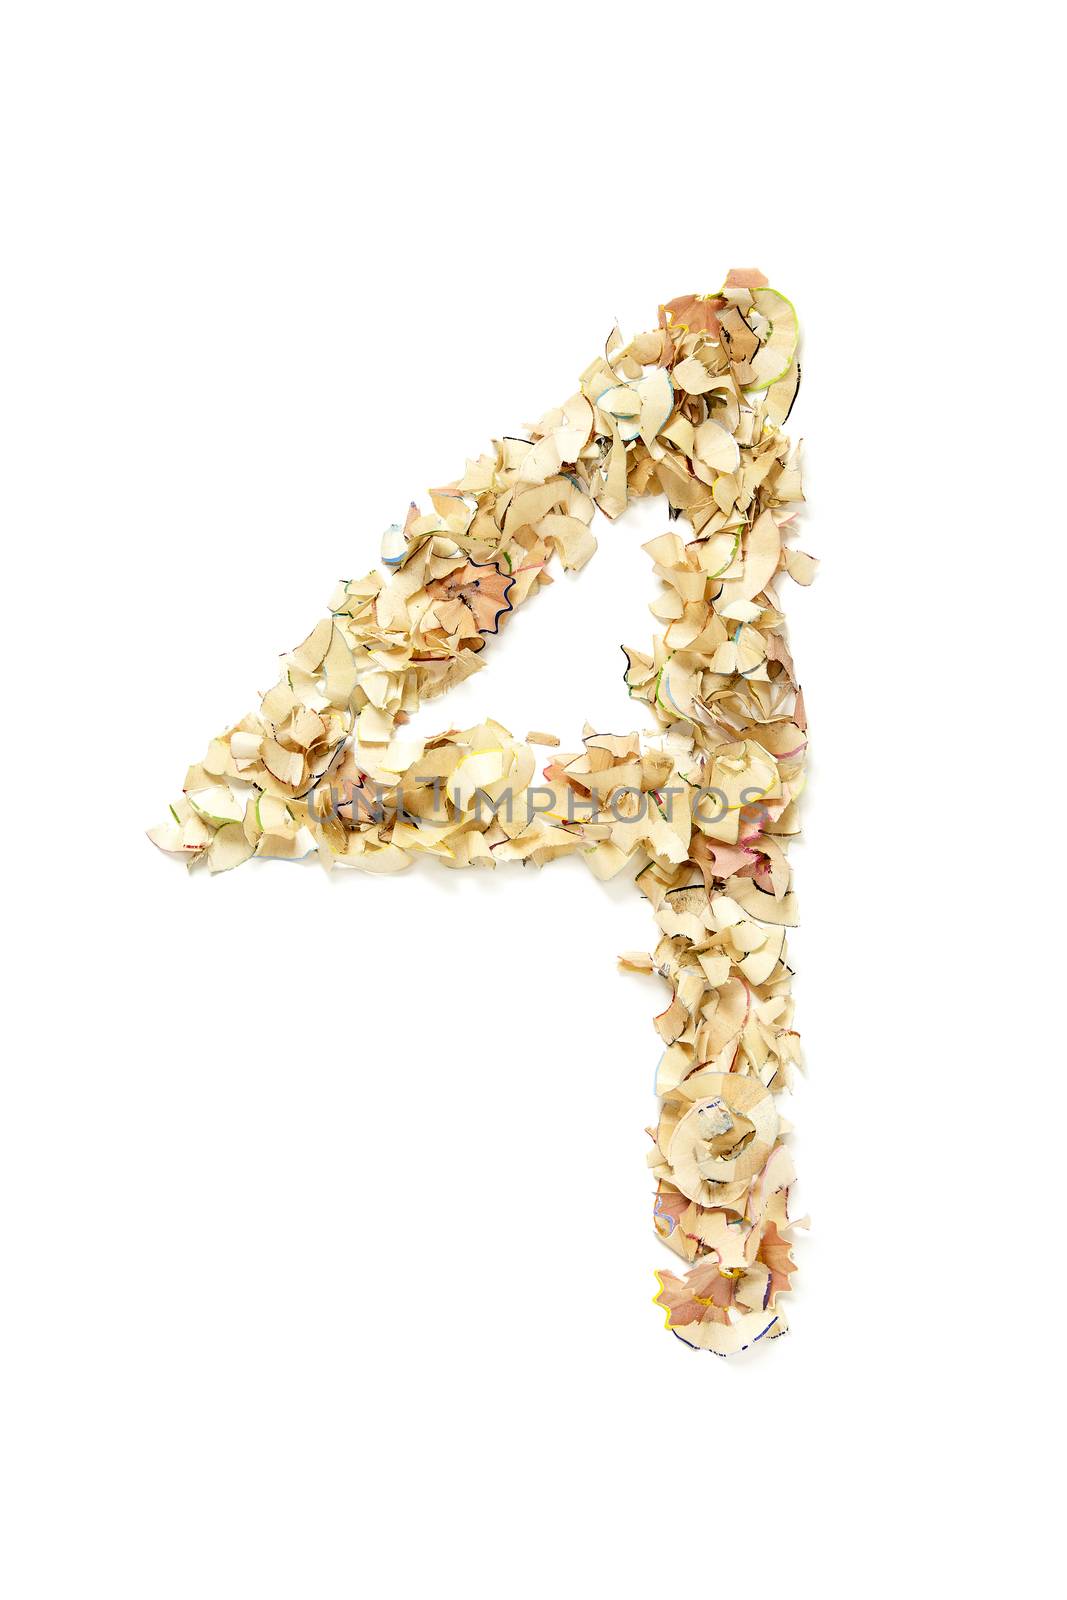 Number 4 made of pencil shavings for your project.